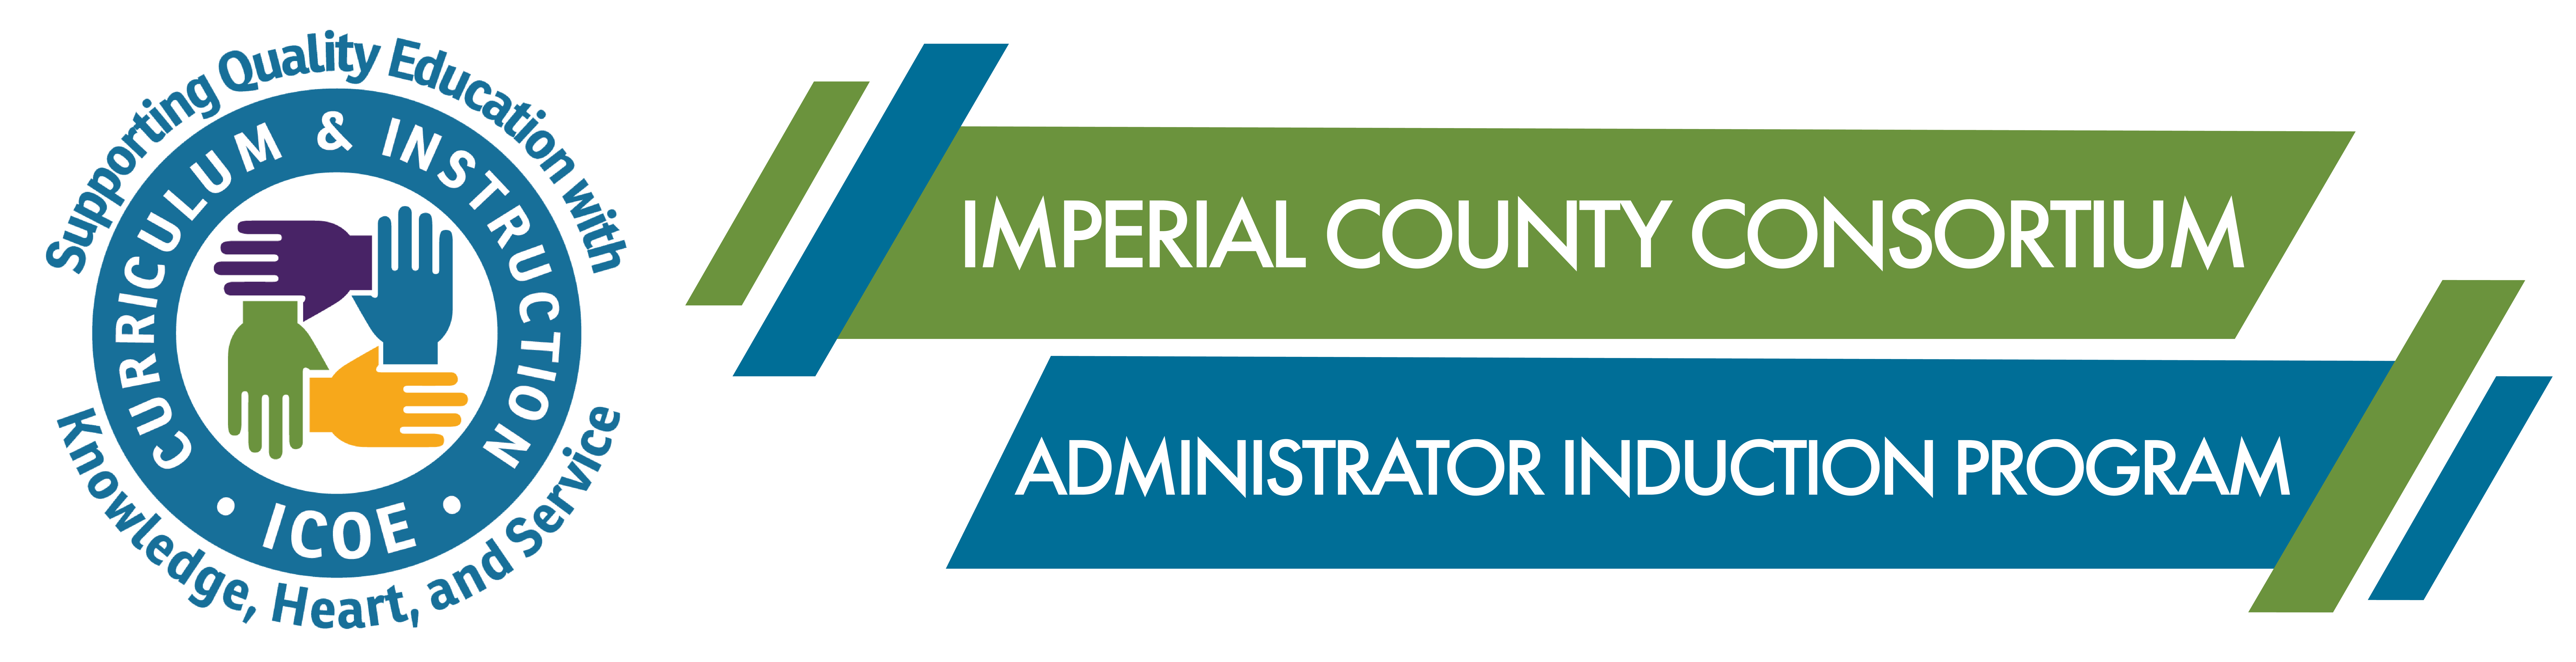 Imperial County Consortium Administrator Induction Program Banner